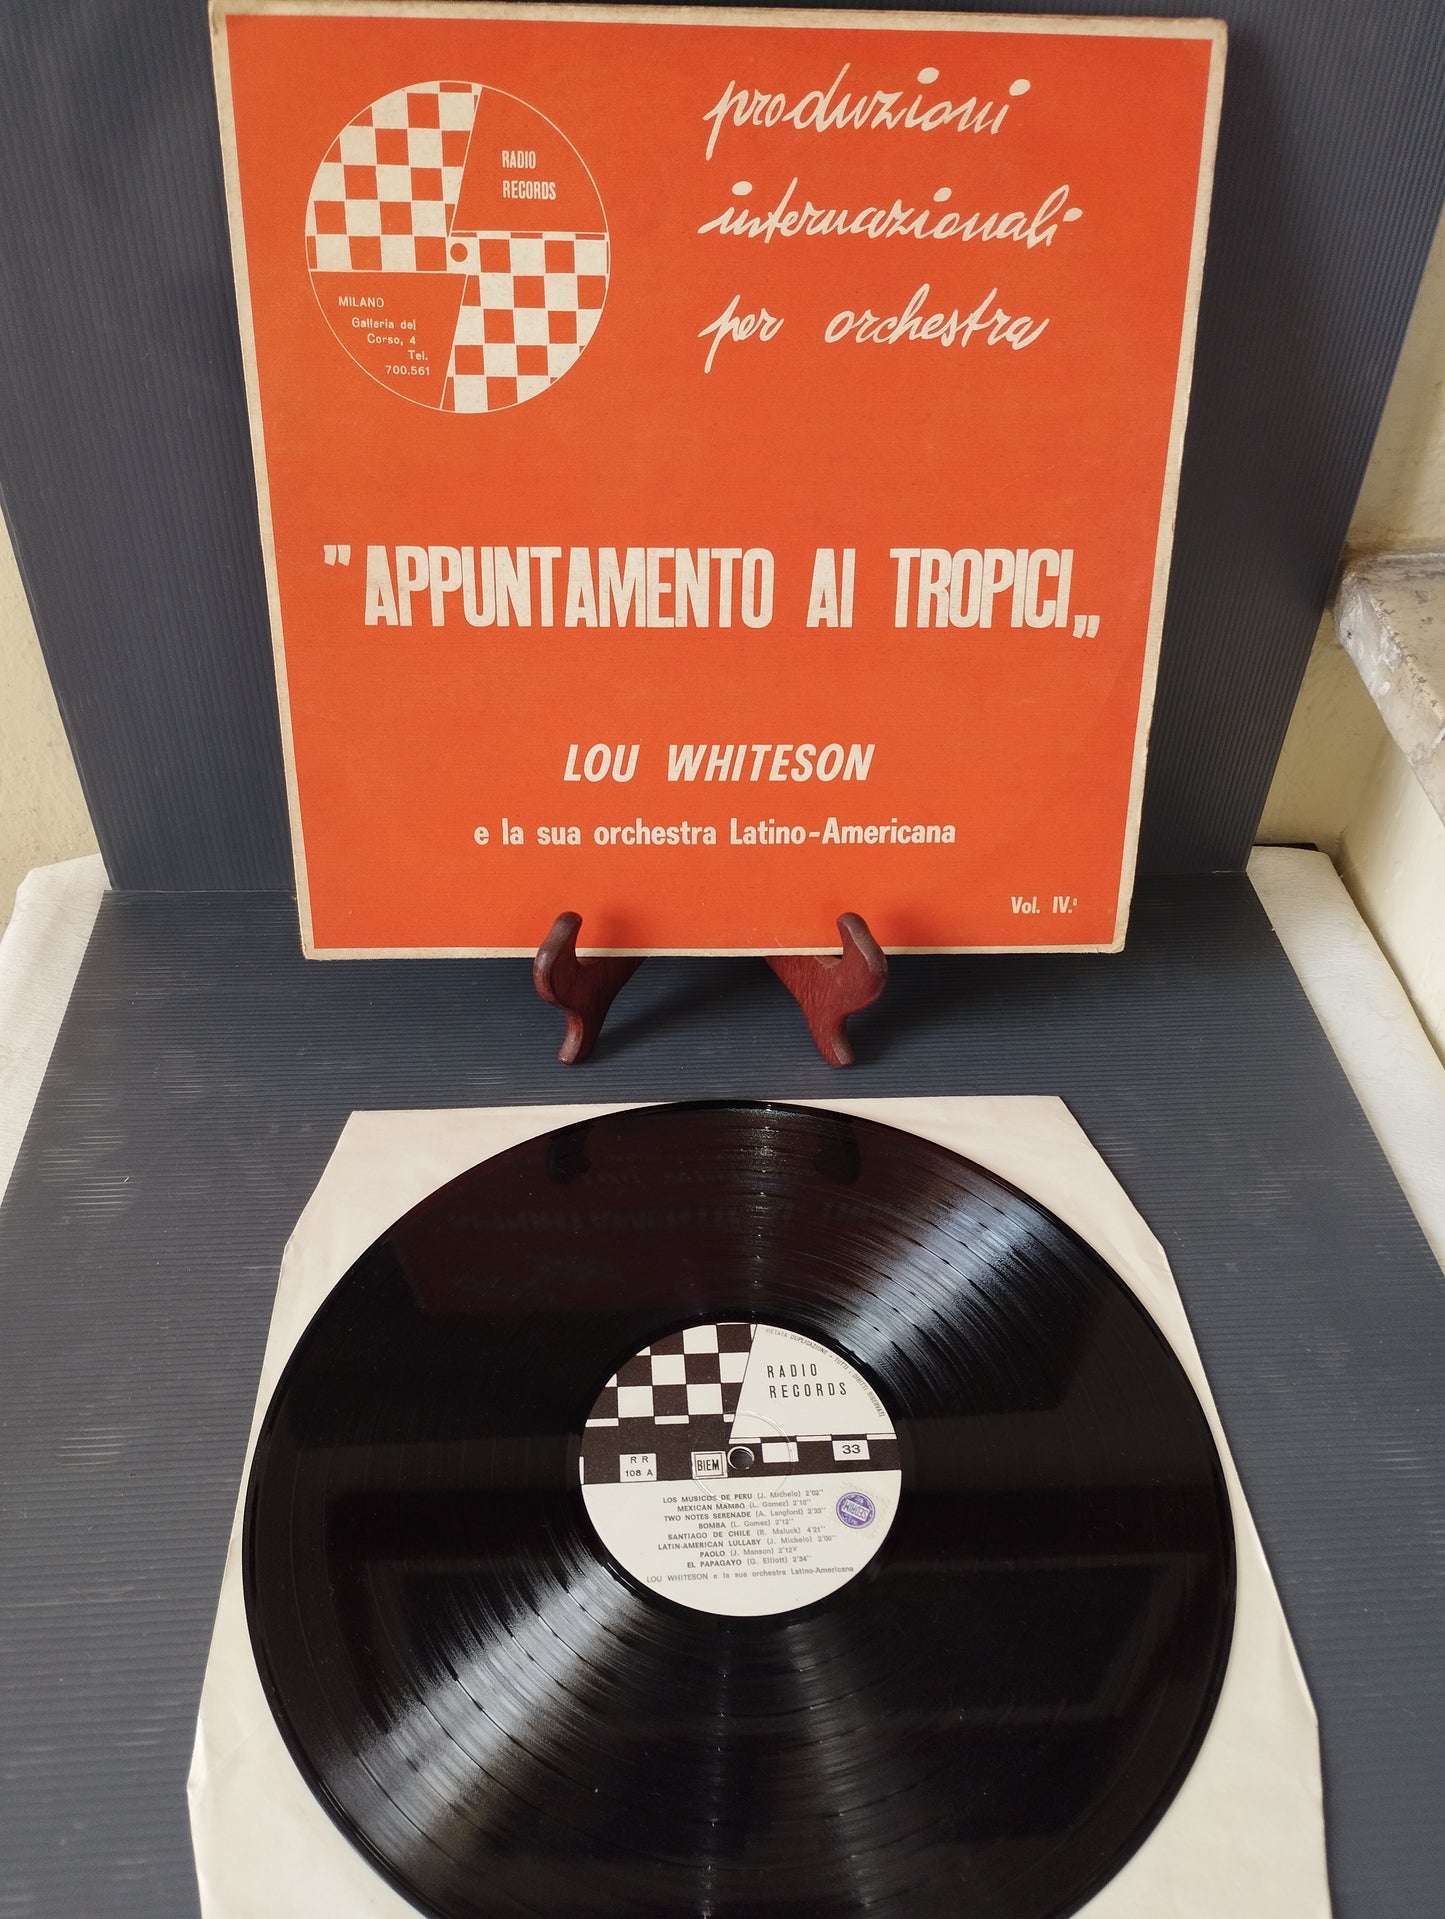 Appointment in the Tropics Vol.IV" Lou Whiteson Lp 33 rpm

 Published in 1966 by Radio Records